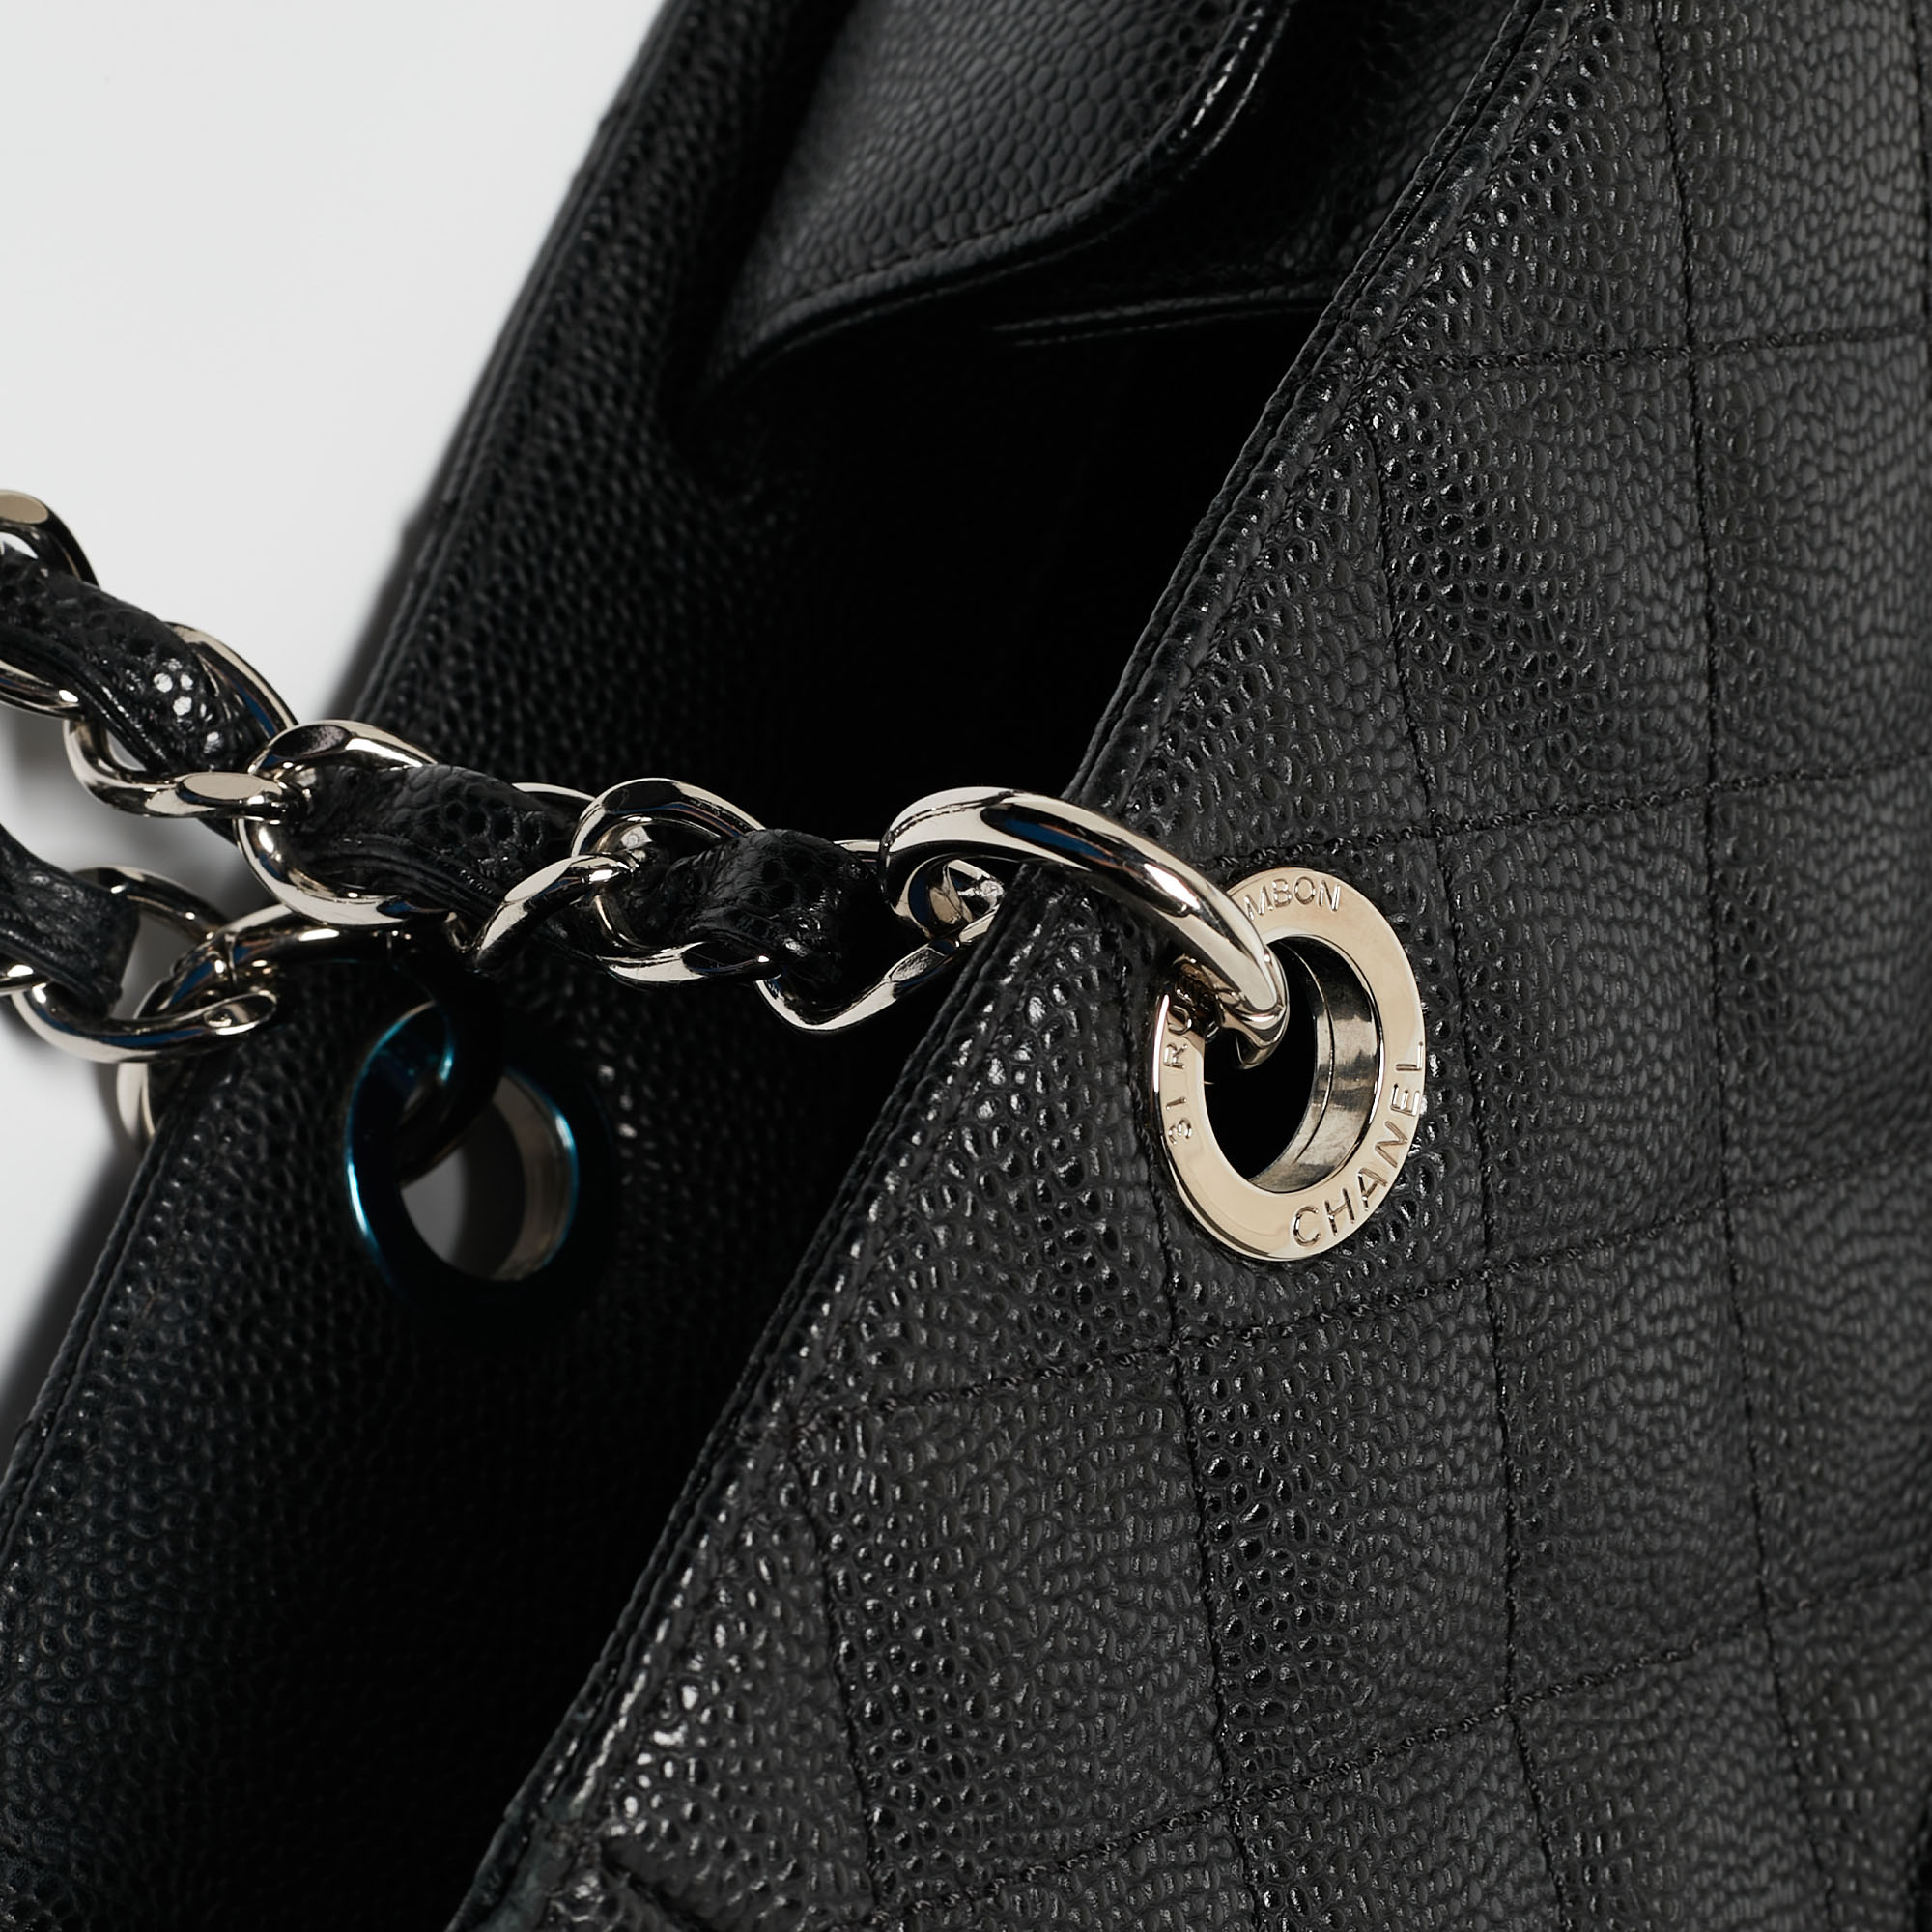 Chanel Black Caviar Quilted Leather CC Tote